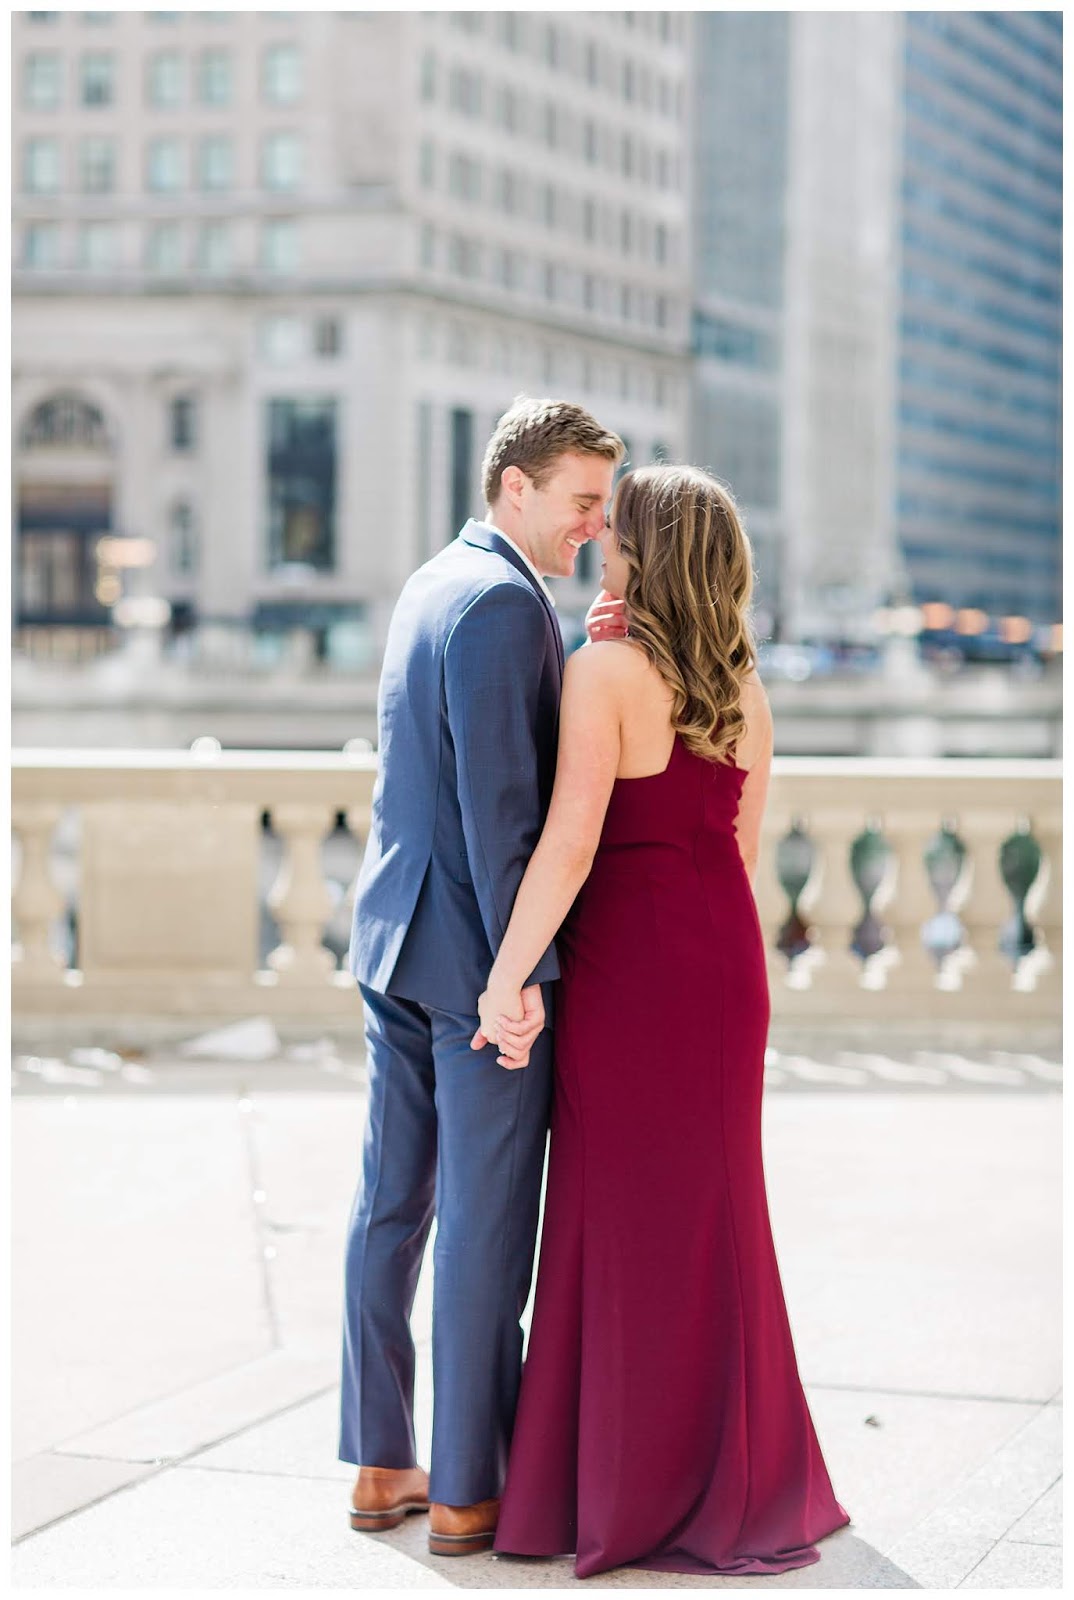 audra & steve: e-session — Photography by Lauryn